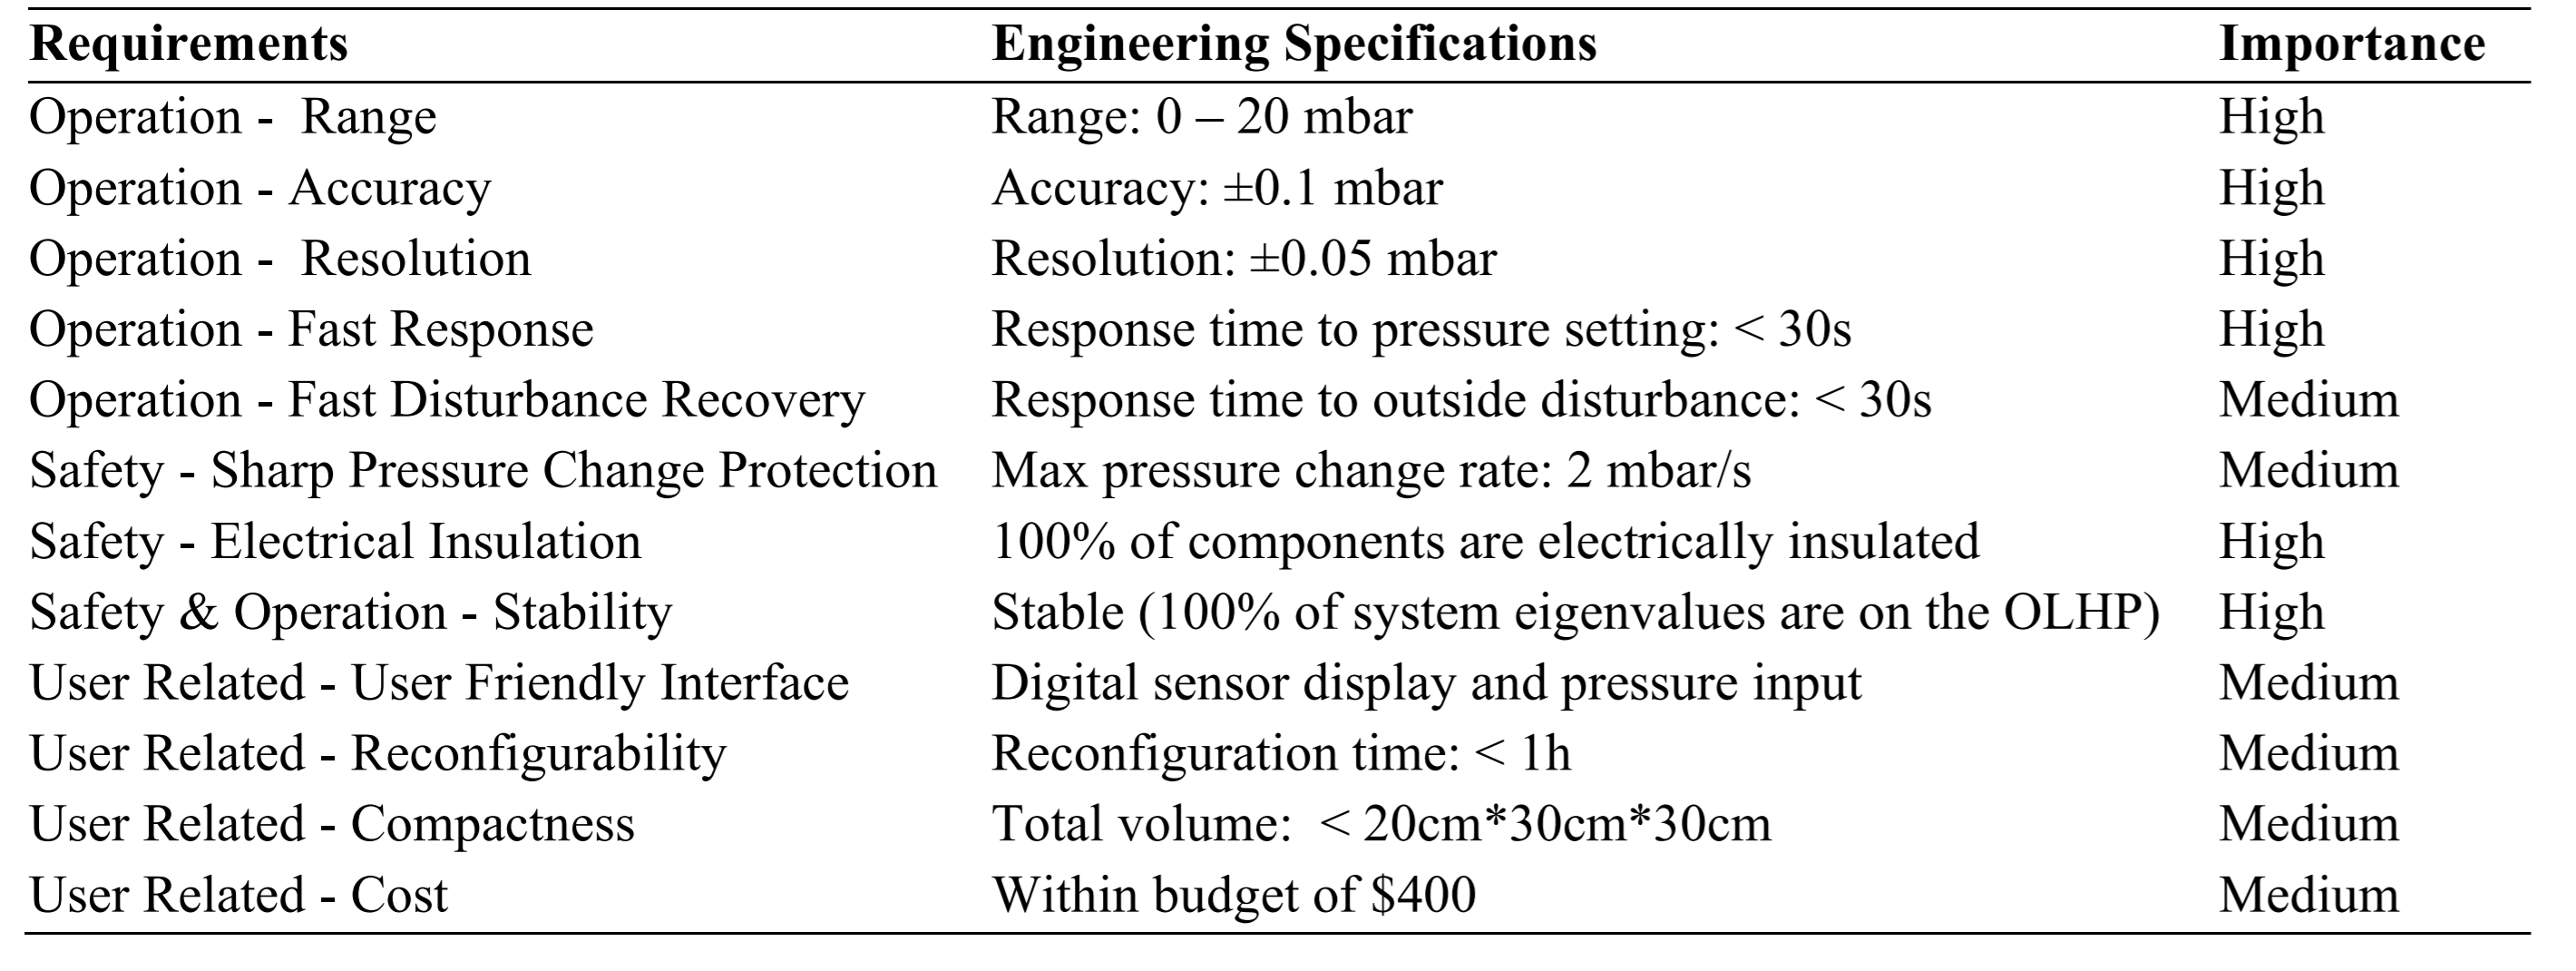 The requirements and their corresponding importance as well as engineering specification associated with the glove box pressure control system.